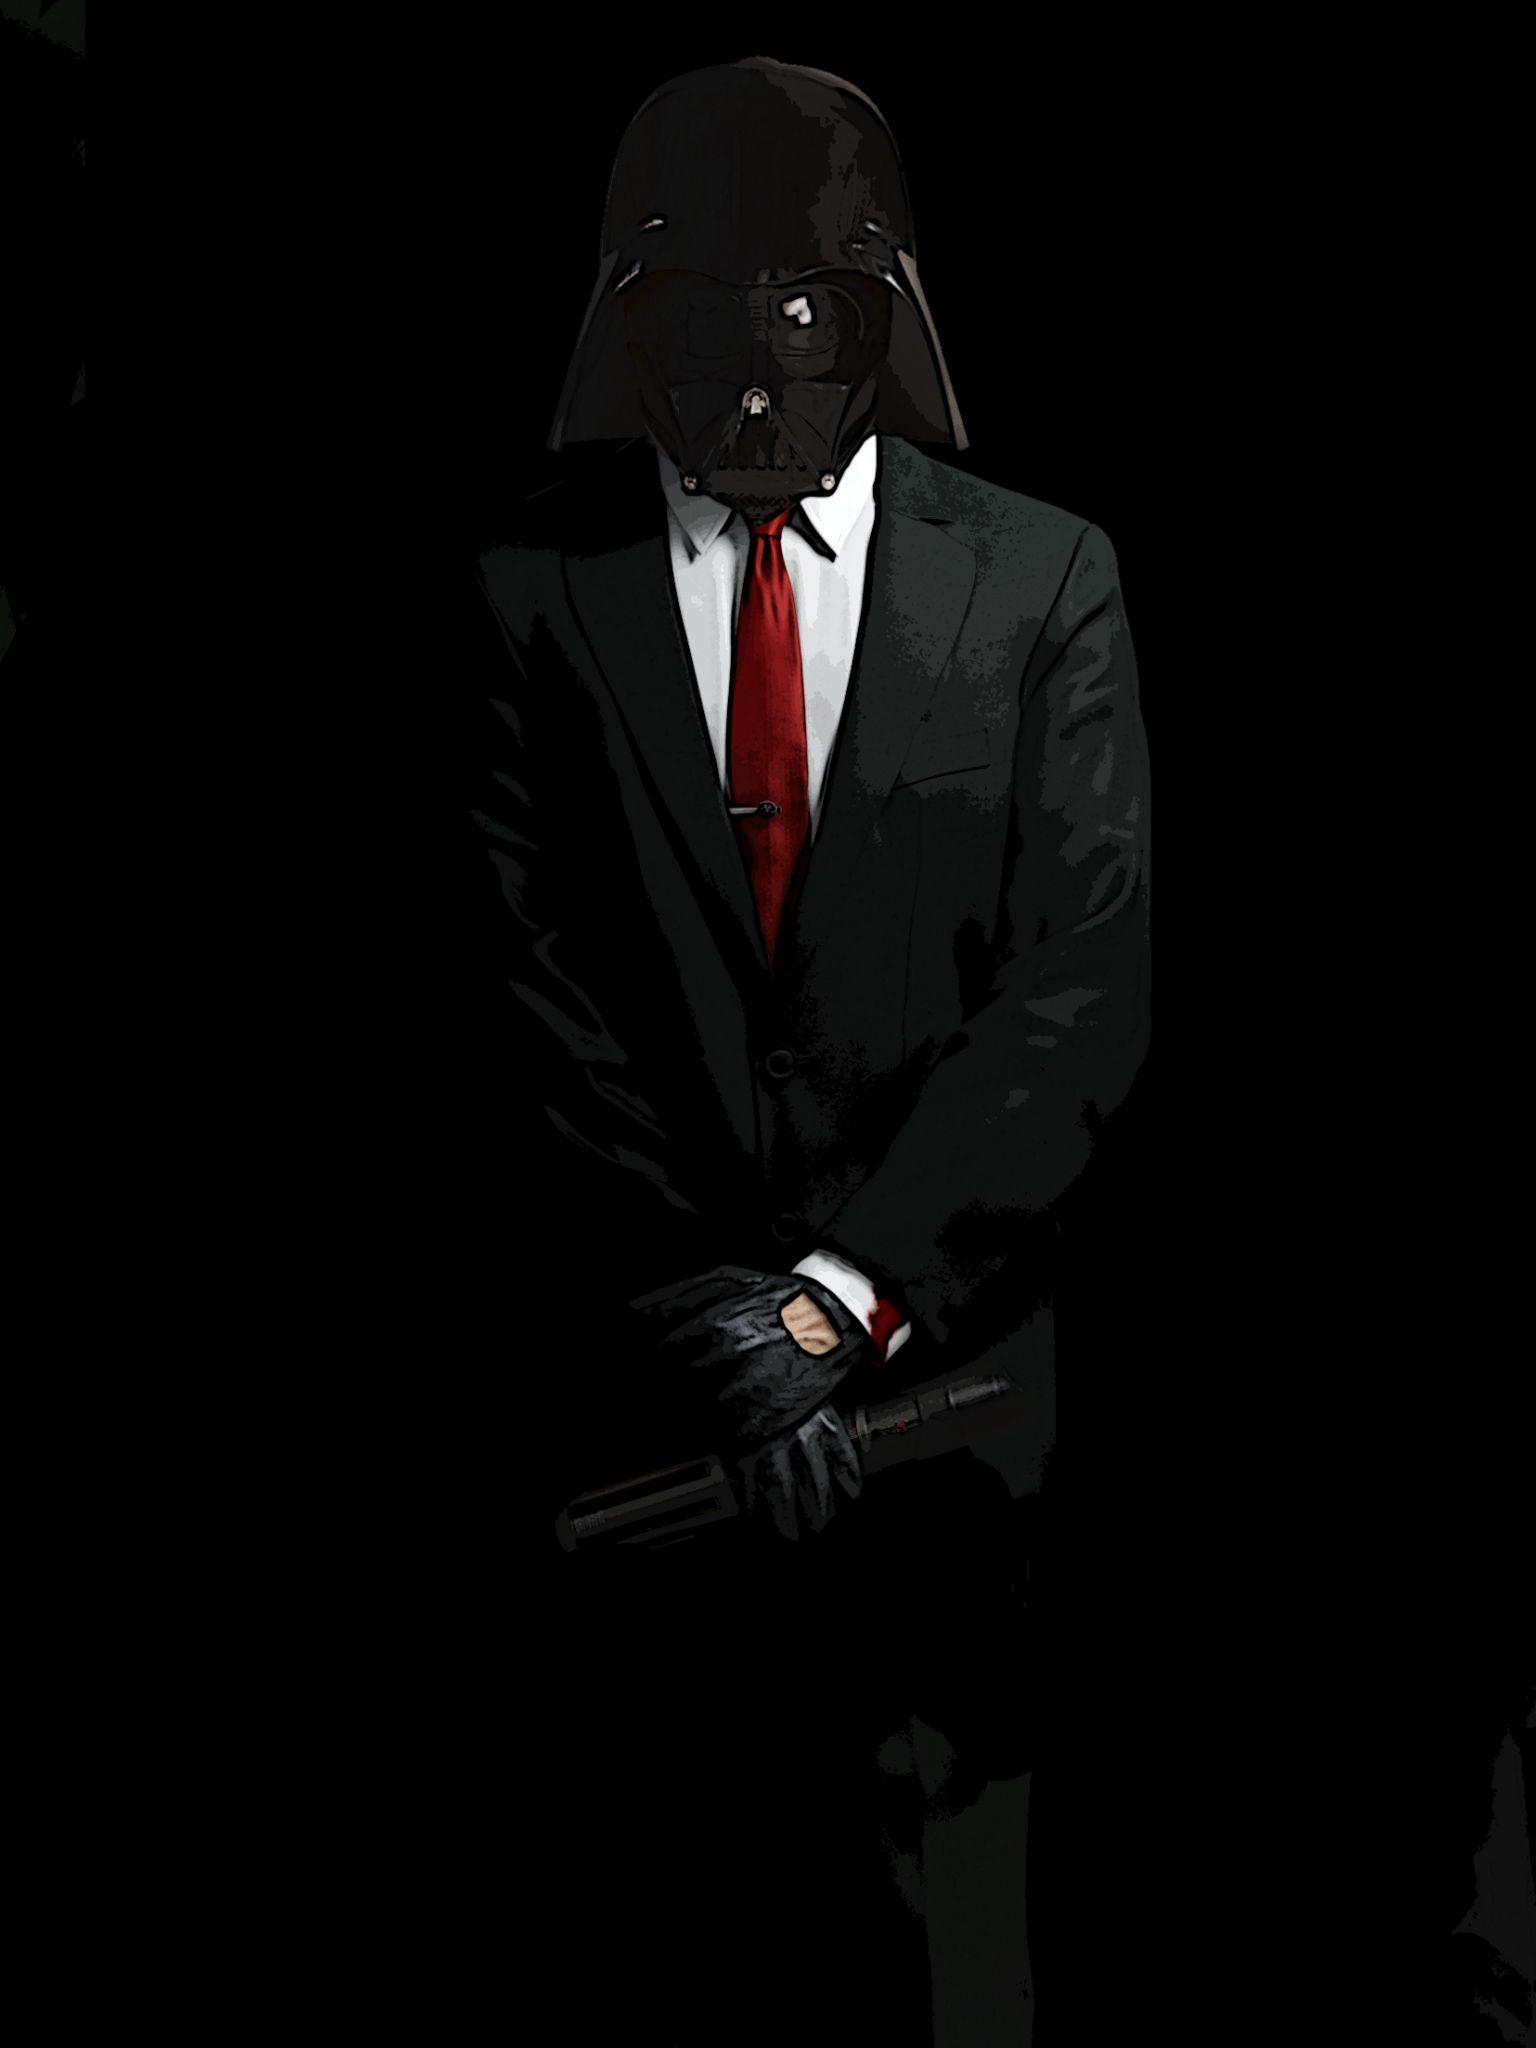 3790x2206px Mobster Background